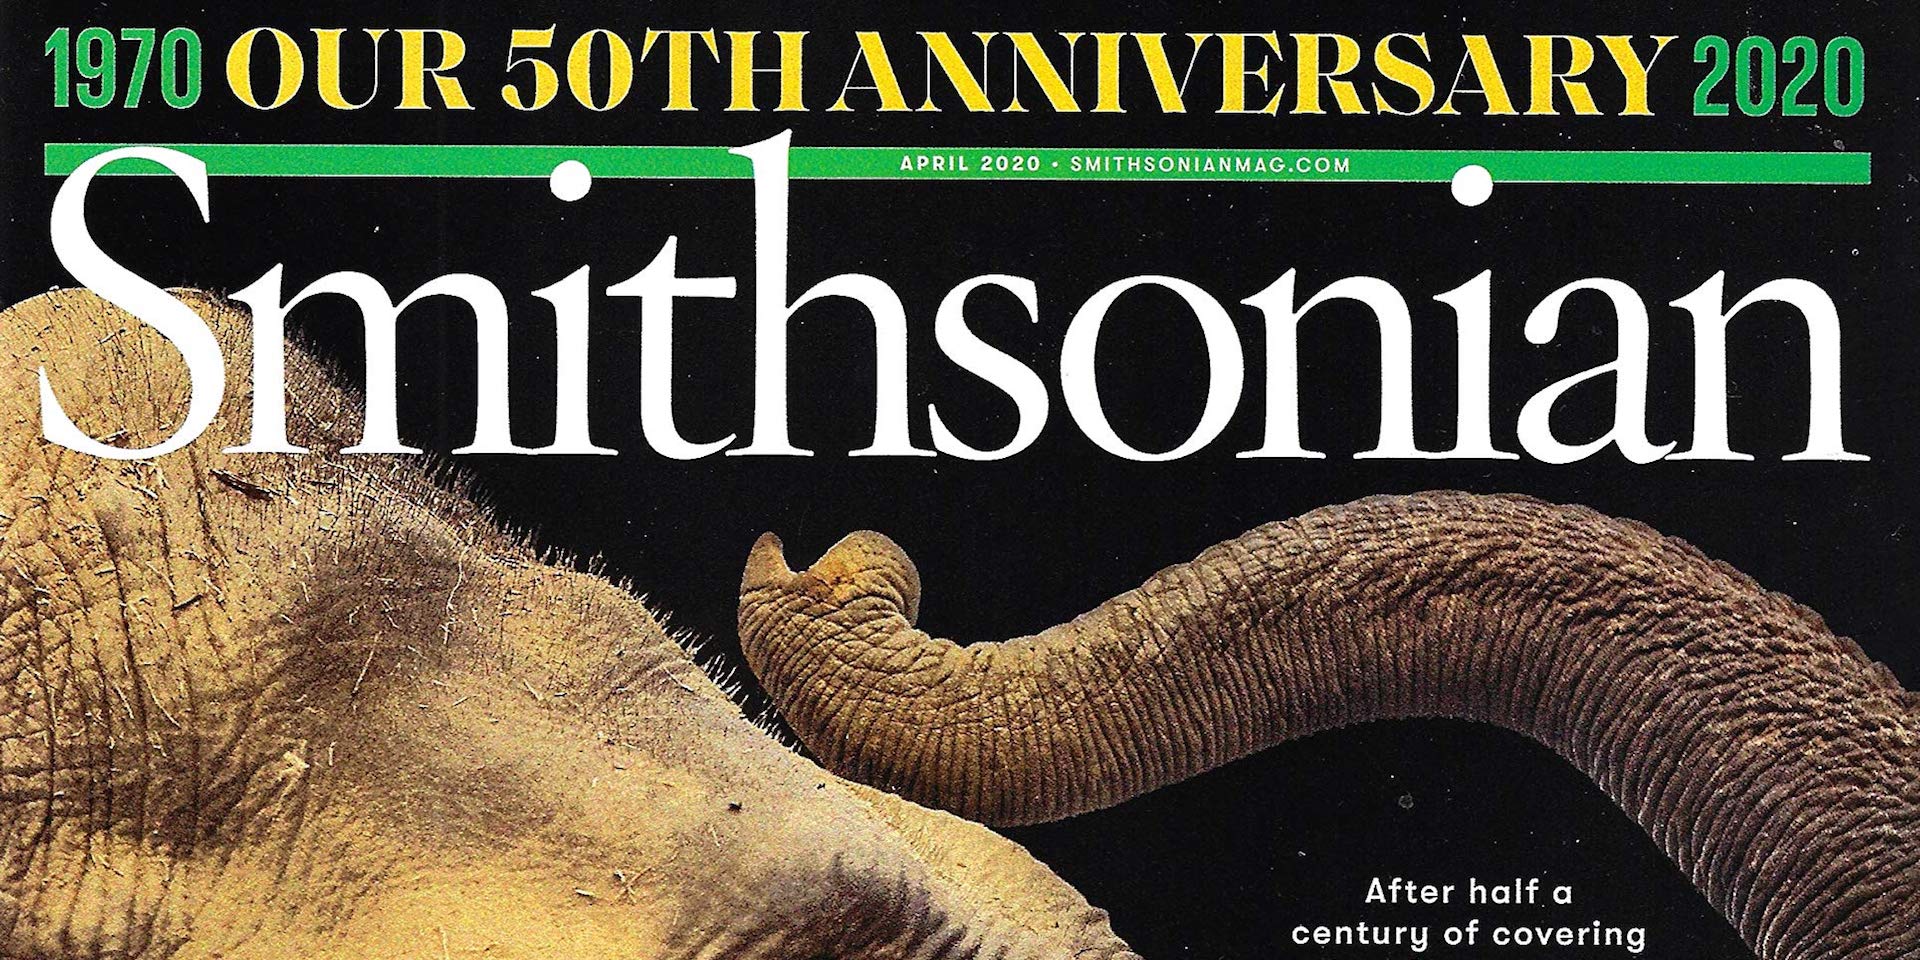 Smithsonian magazine now available at under 8/yr. + more 9to5Toys